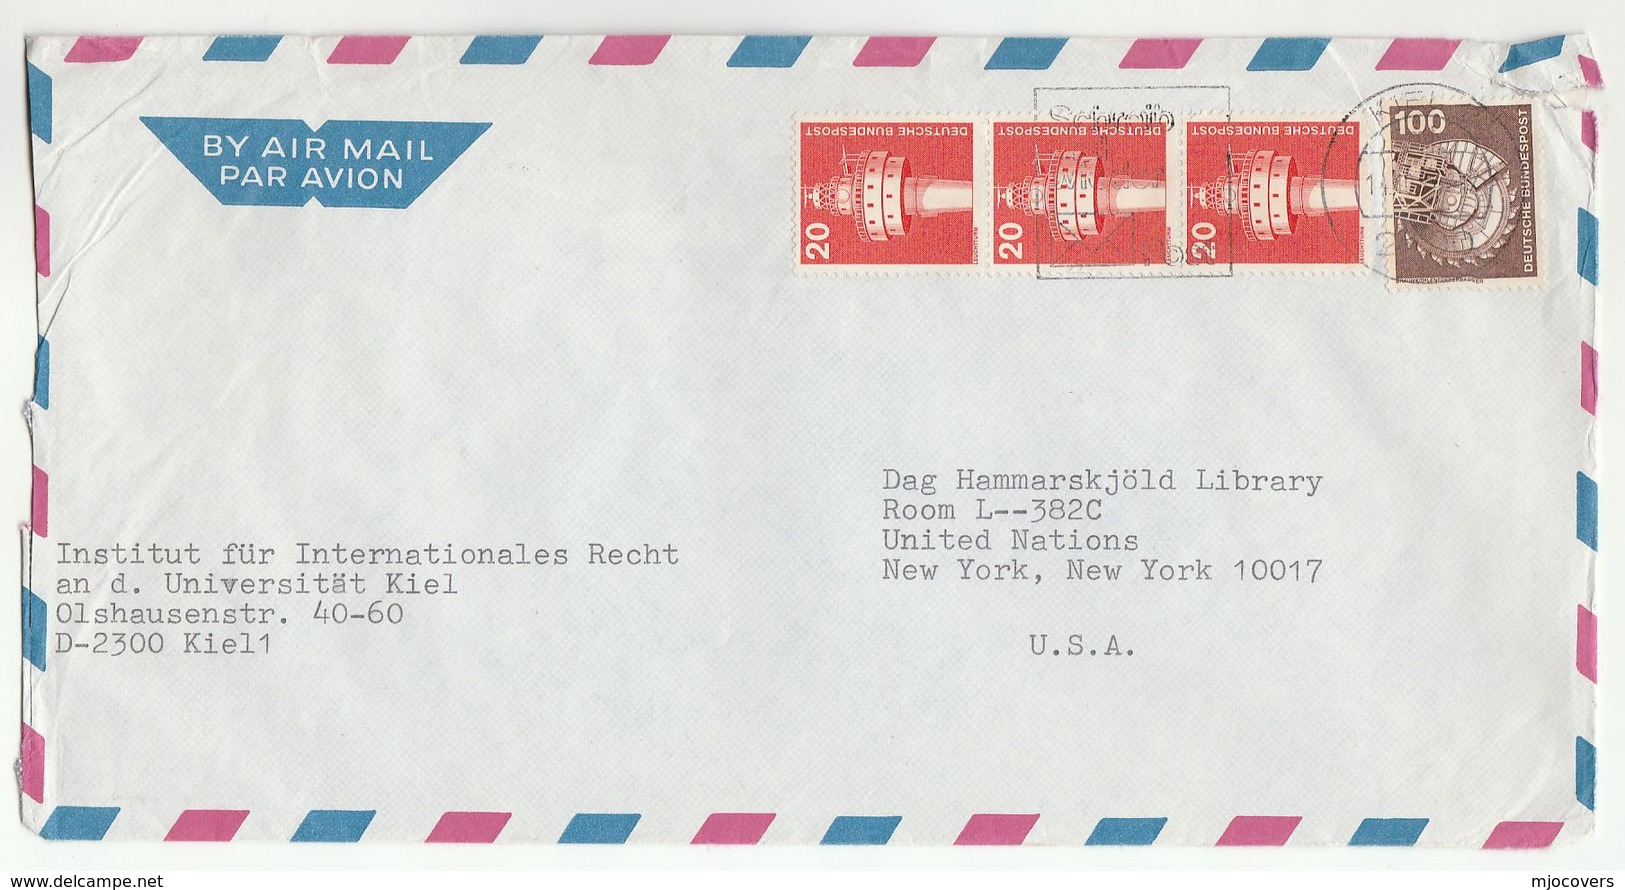 1970s International RIGHTS INSTITUTE Kiel UNIVERSITY To UNITED NATIONS USA Un Stamps Cover Germany Stamps - UNO